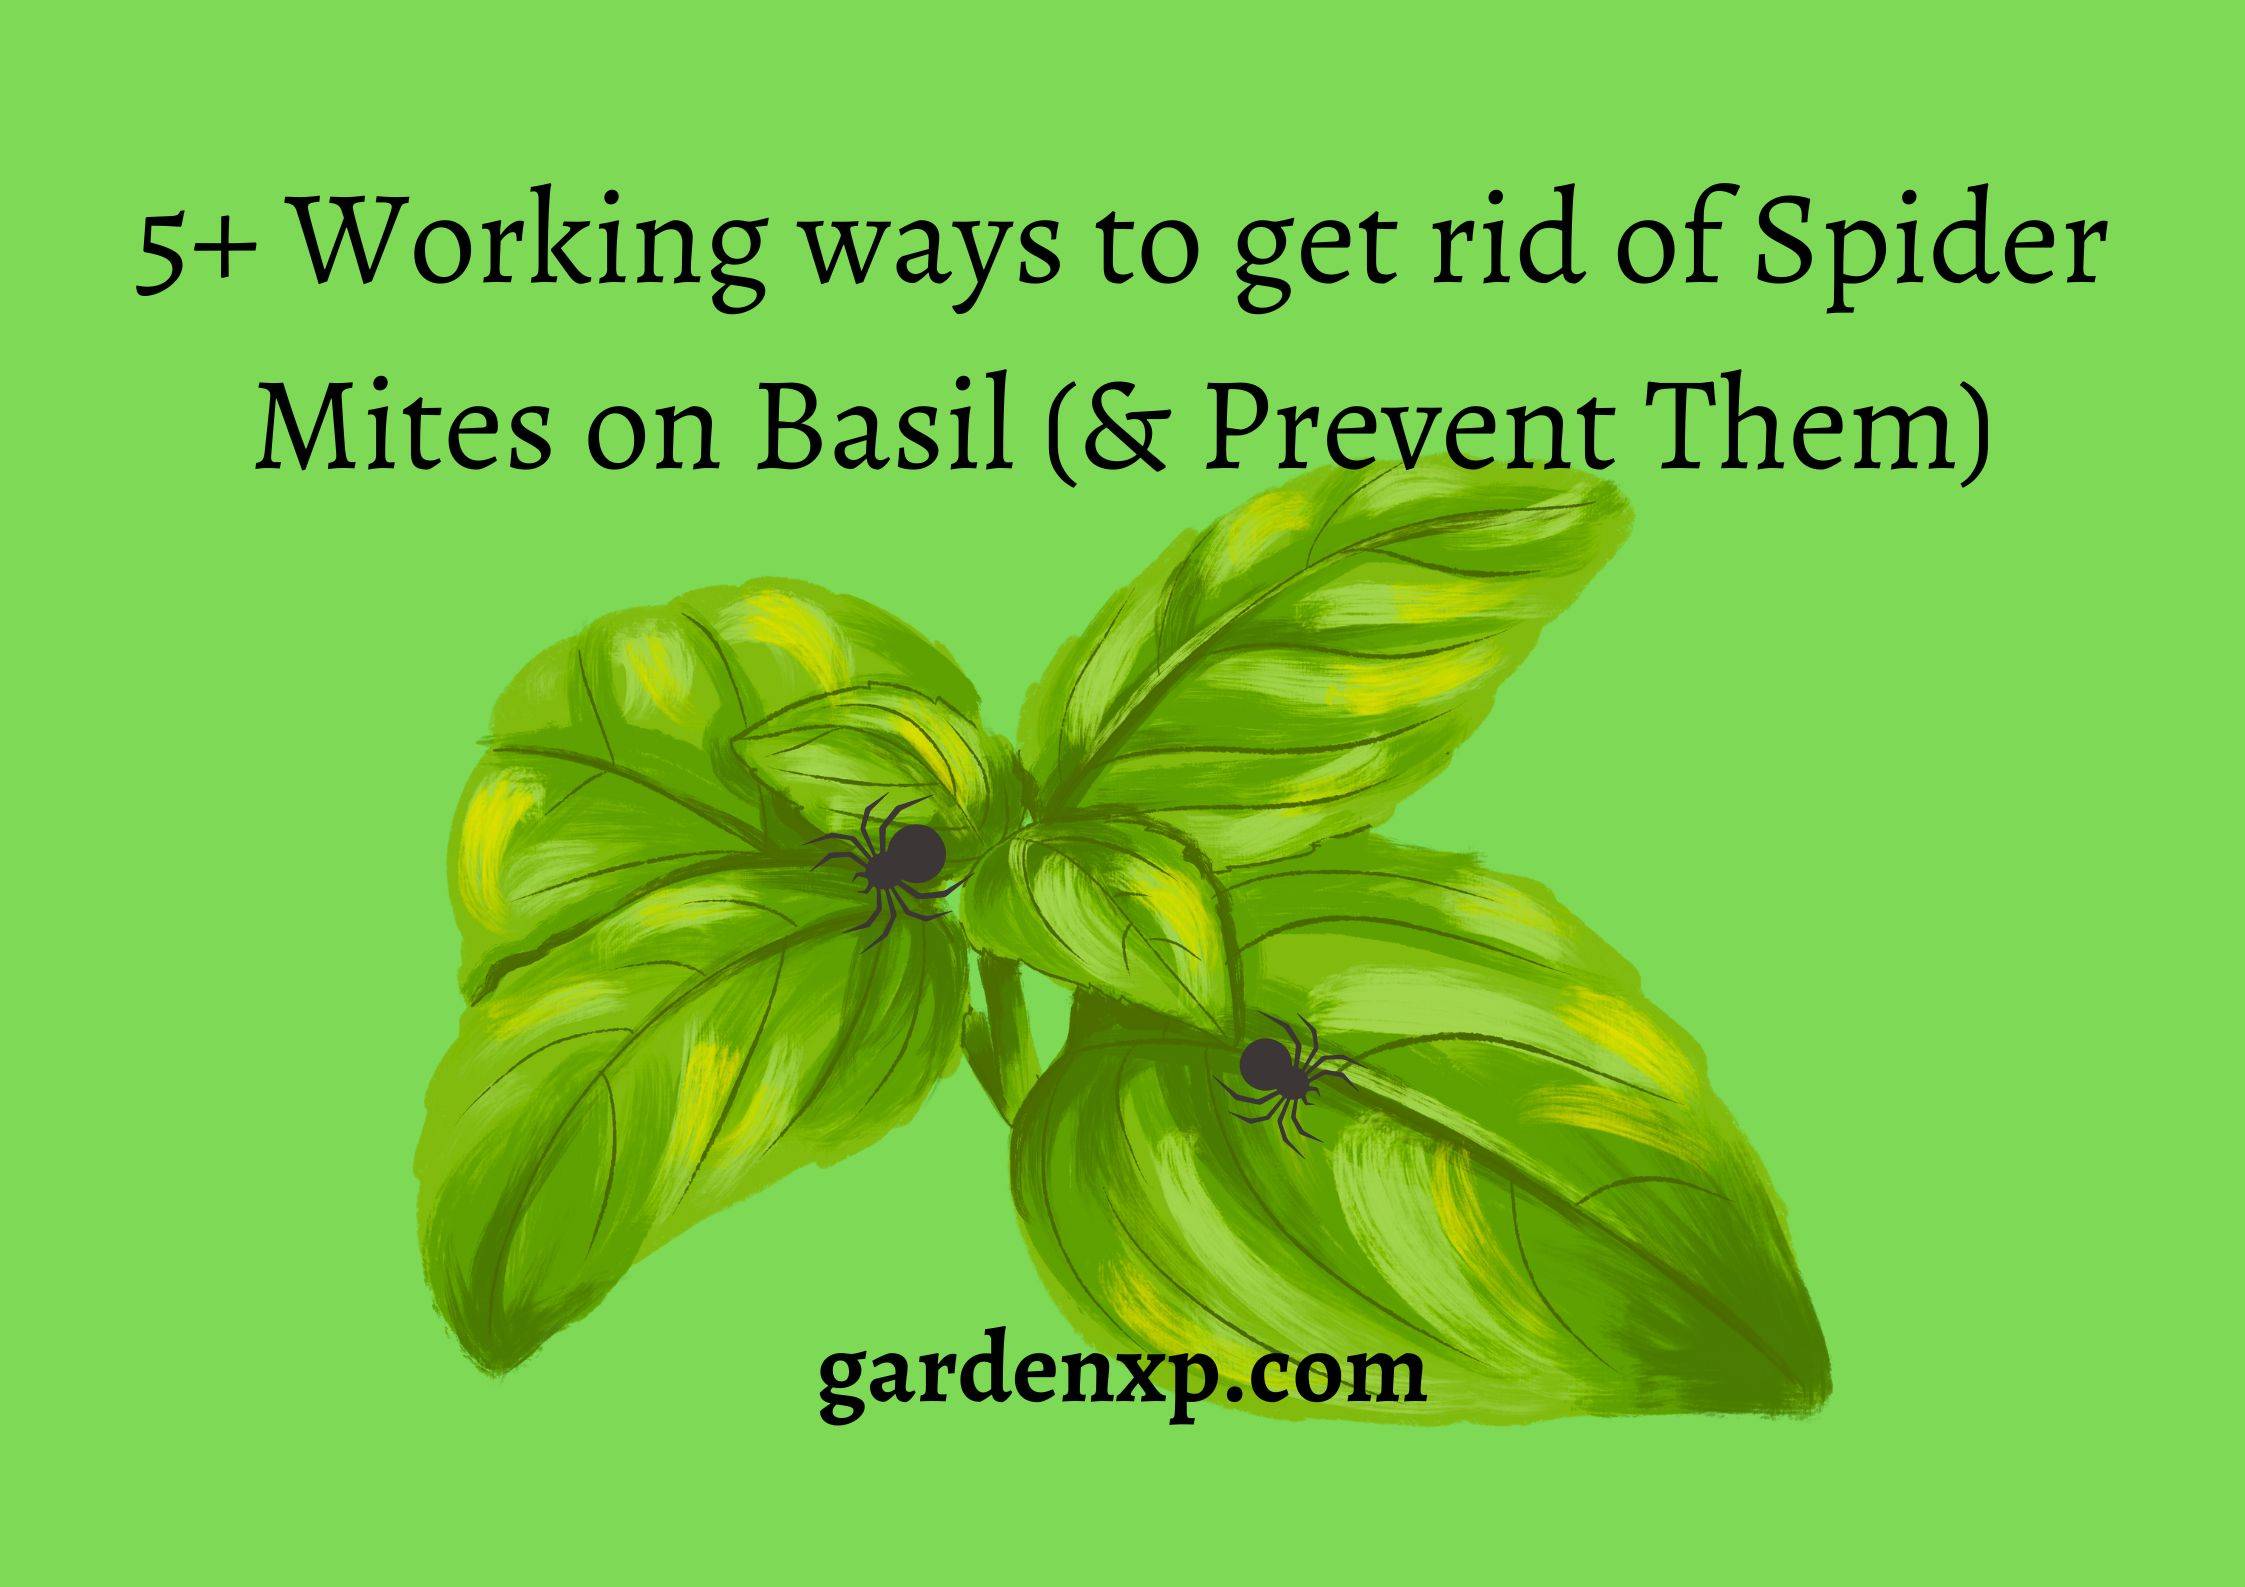 5+ Working ways to get rid of Spider Mites on Basil (& Prevent Them)